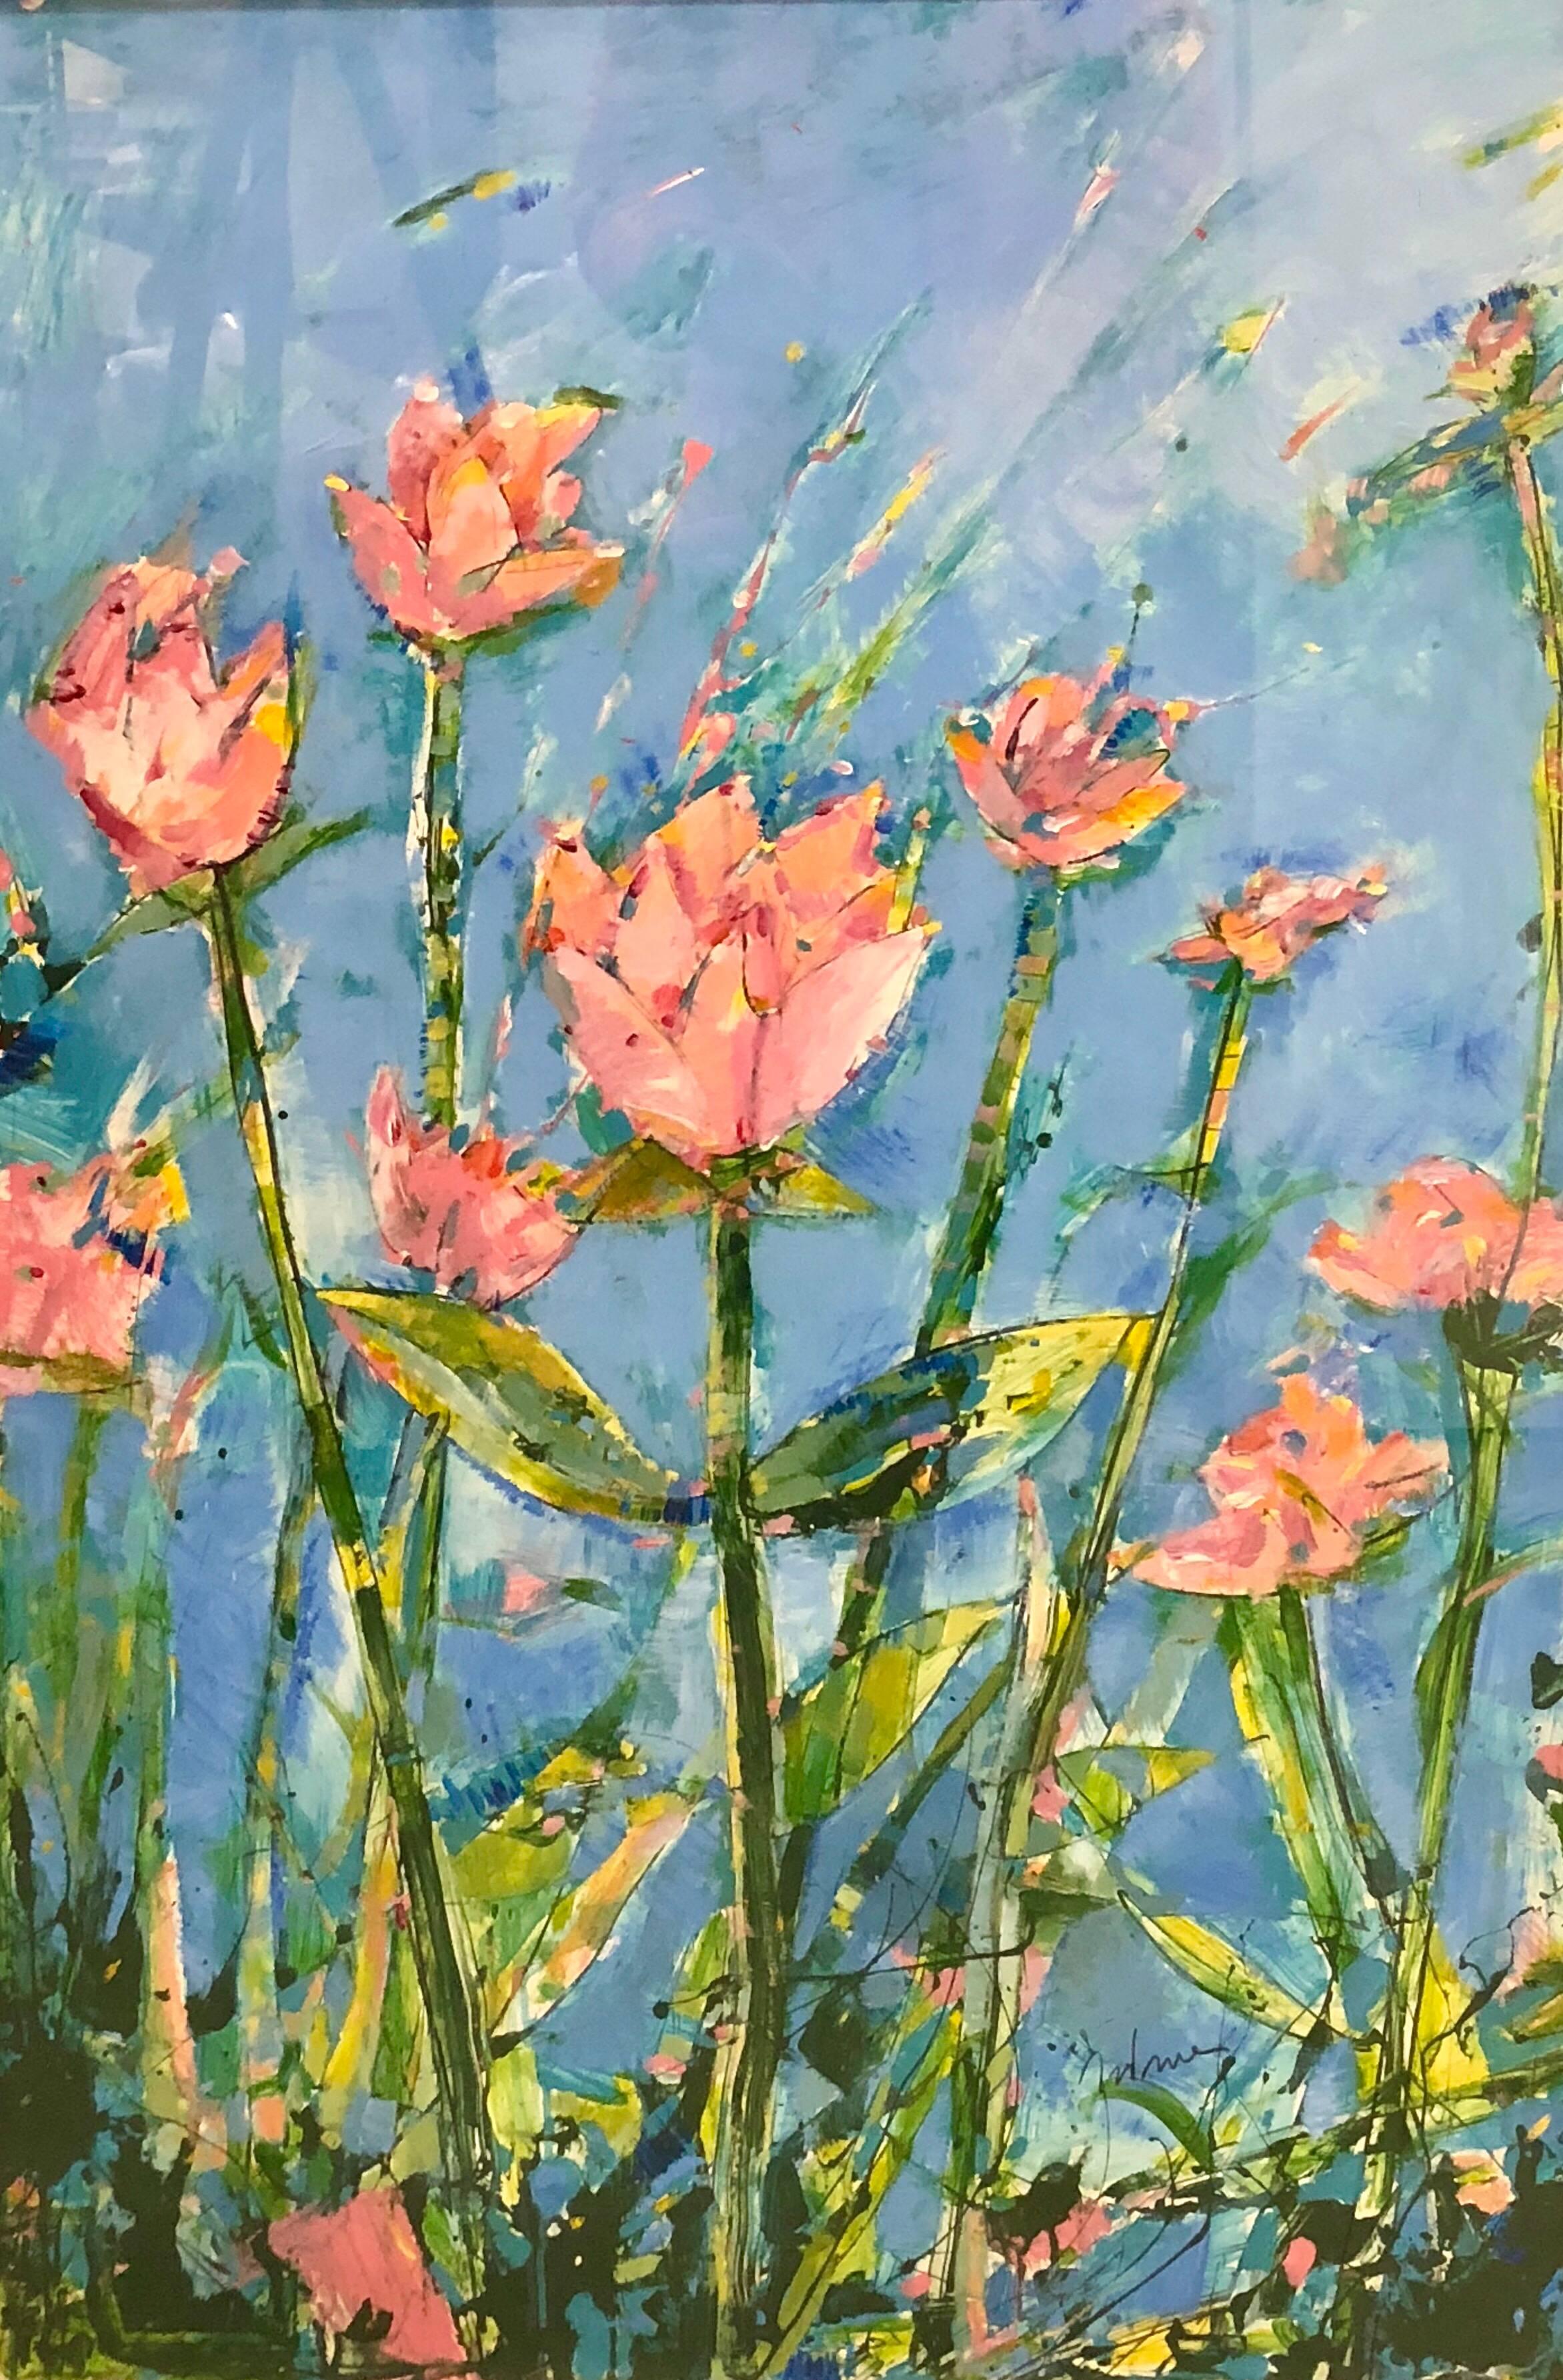 Painting of flowers by James Antonie. Signed. Acrylic on paper.

The painting is filled with exuberant color, light, vitality and life

Framed in white wood with plexi-glass. Dimensions below are framed dimensions.

   